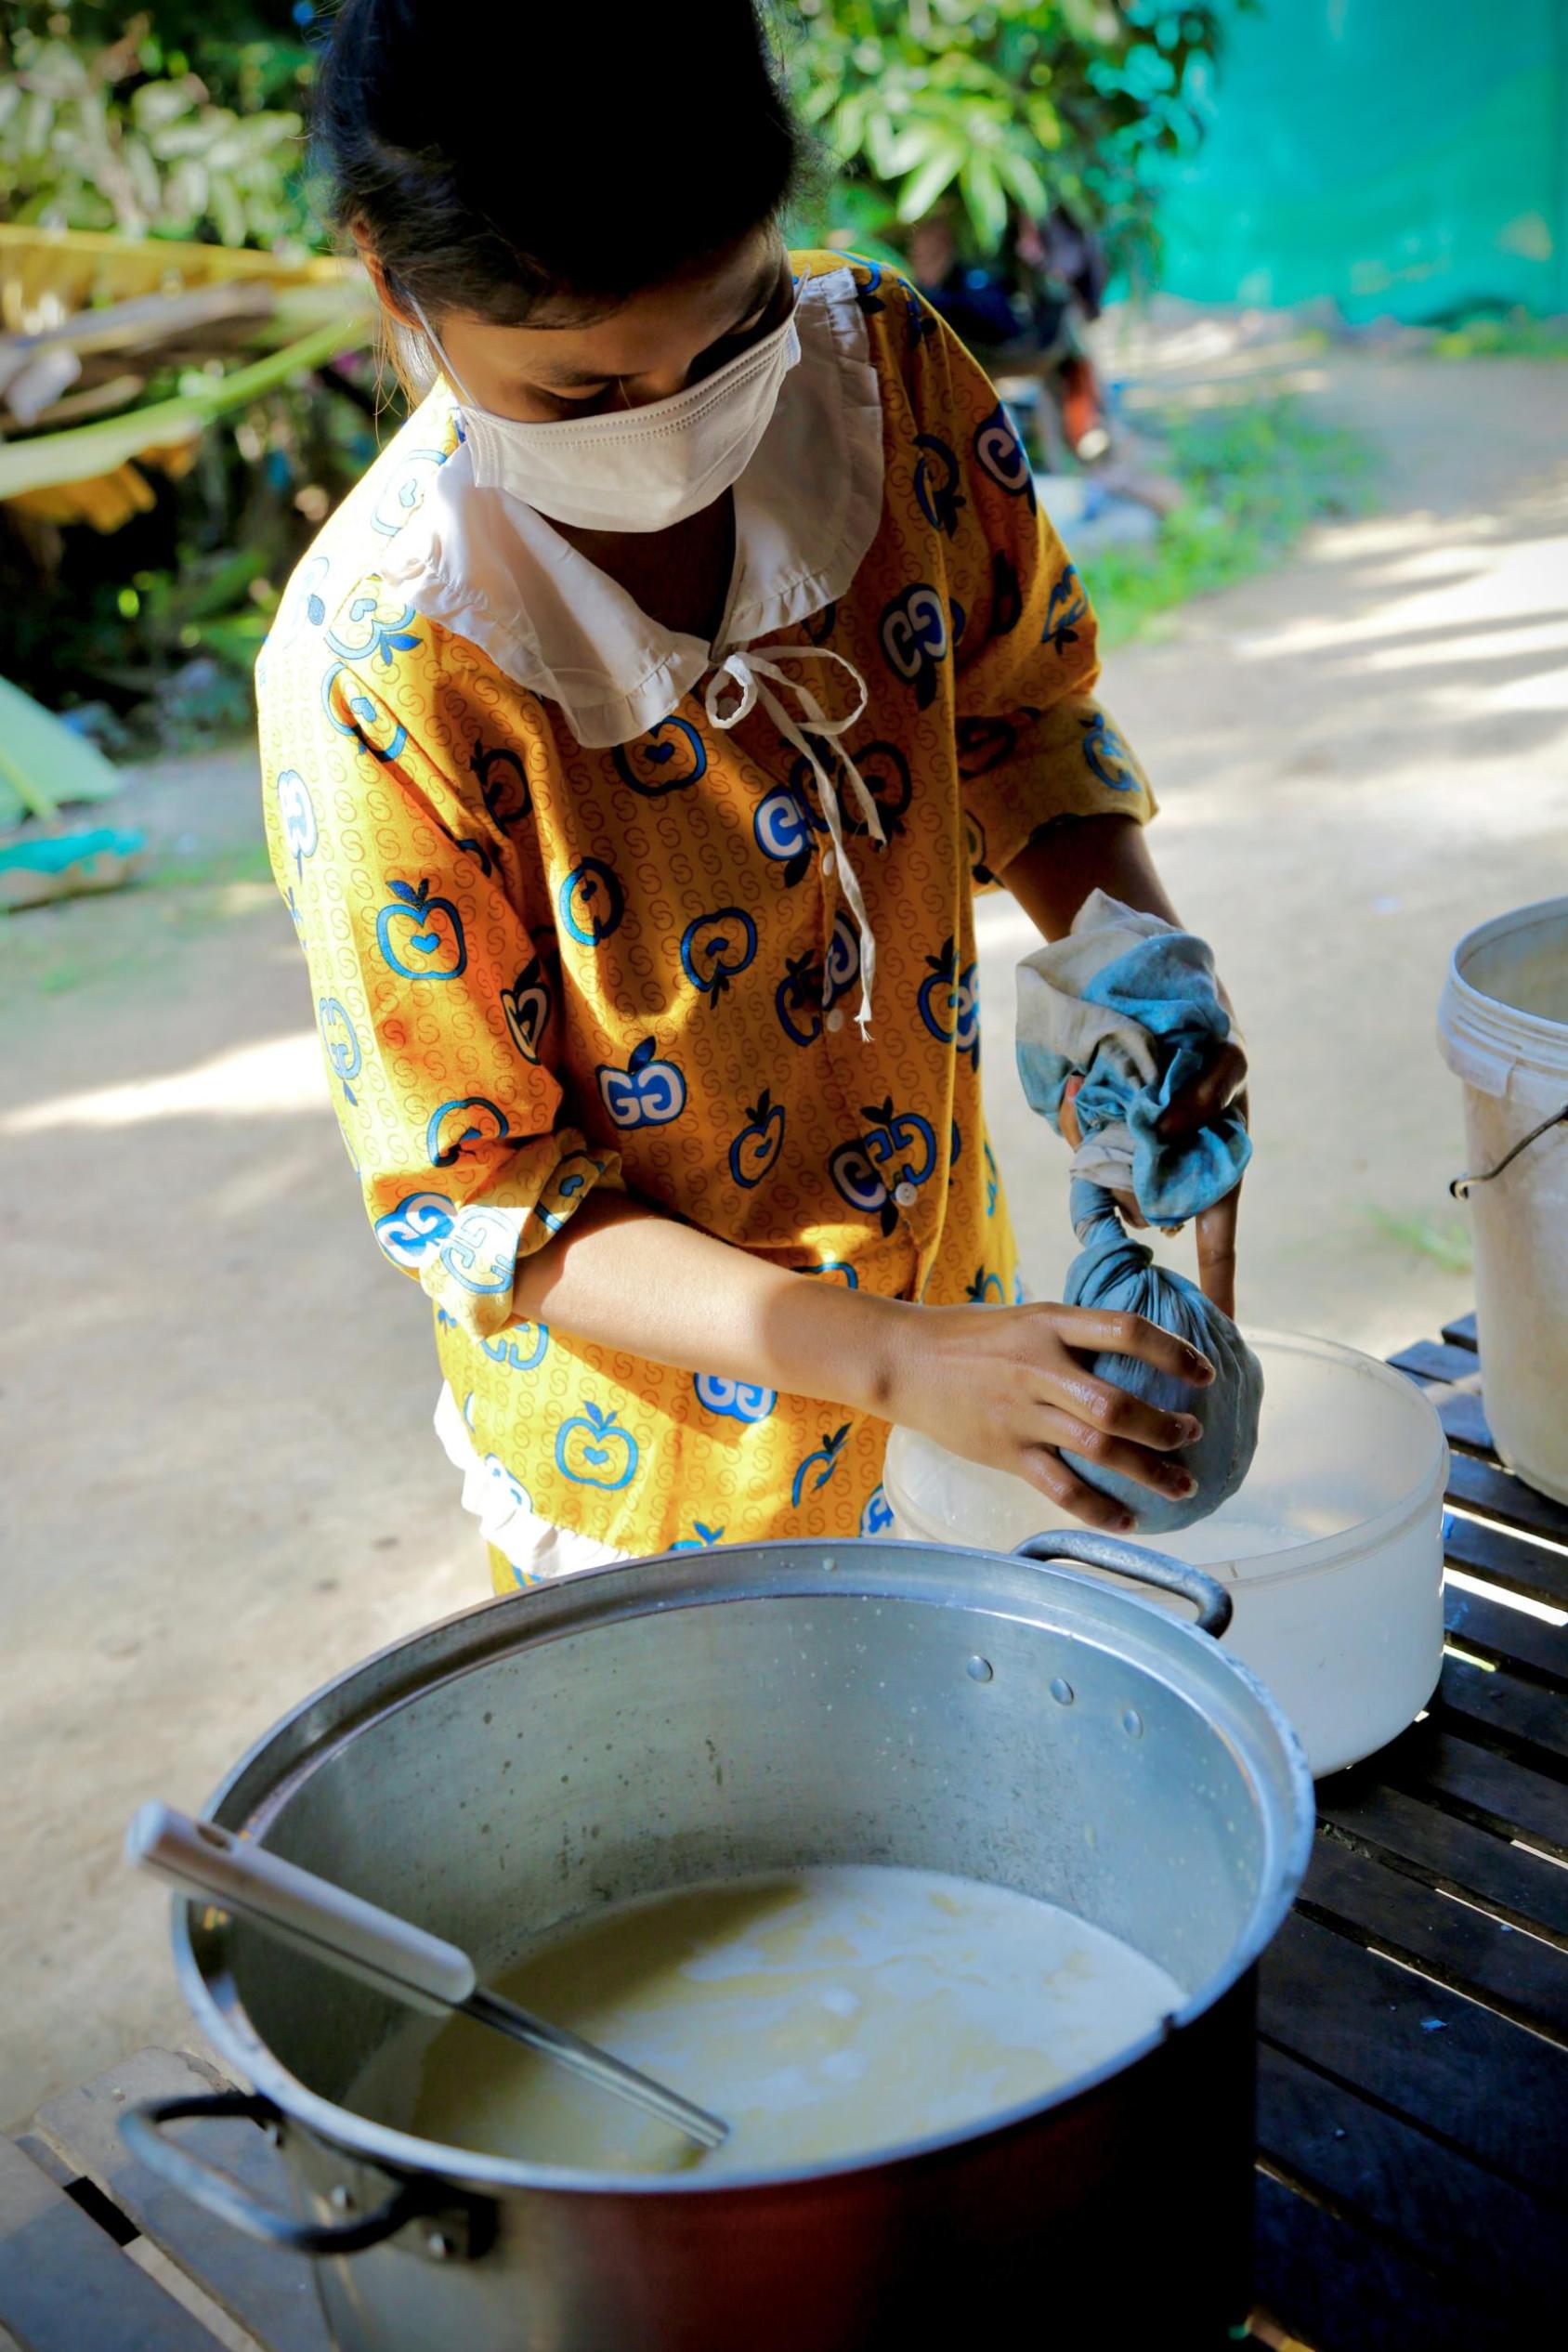 A women is squeezing cooked soy beans in a towel to make soy milk.